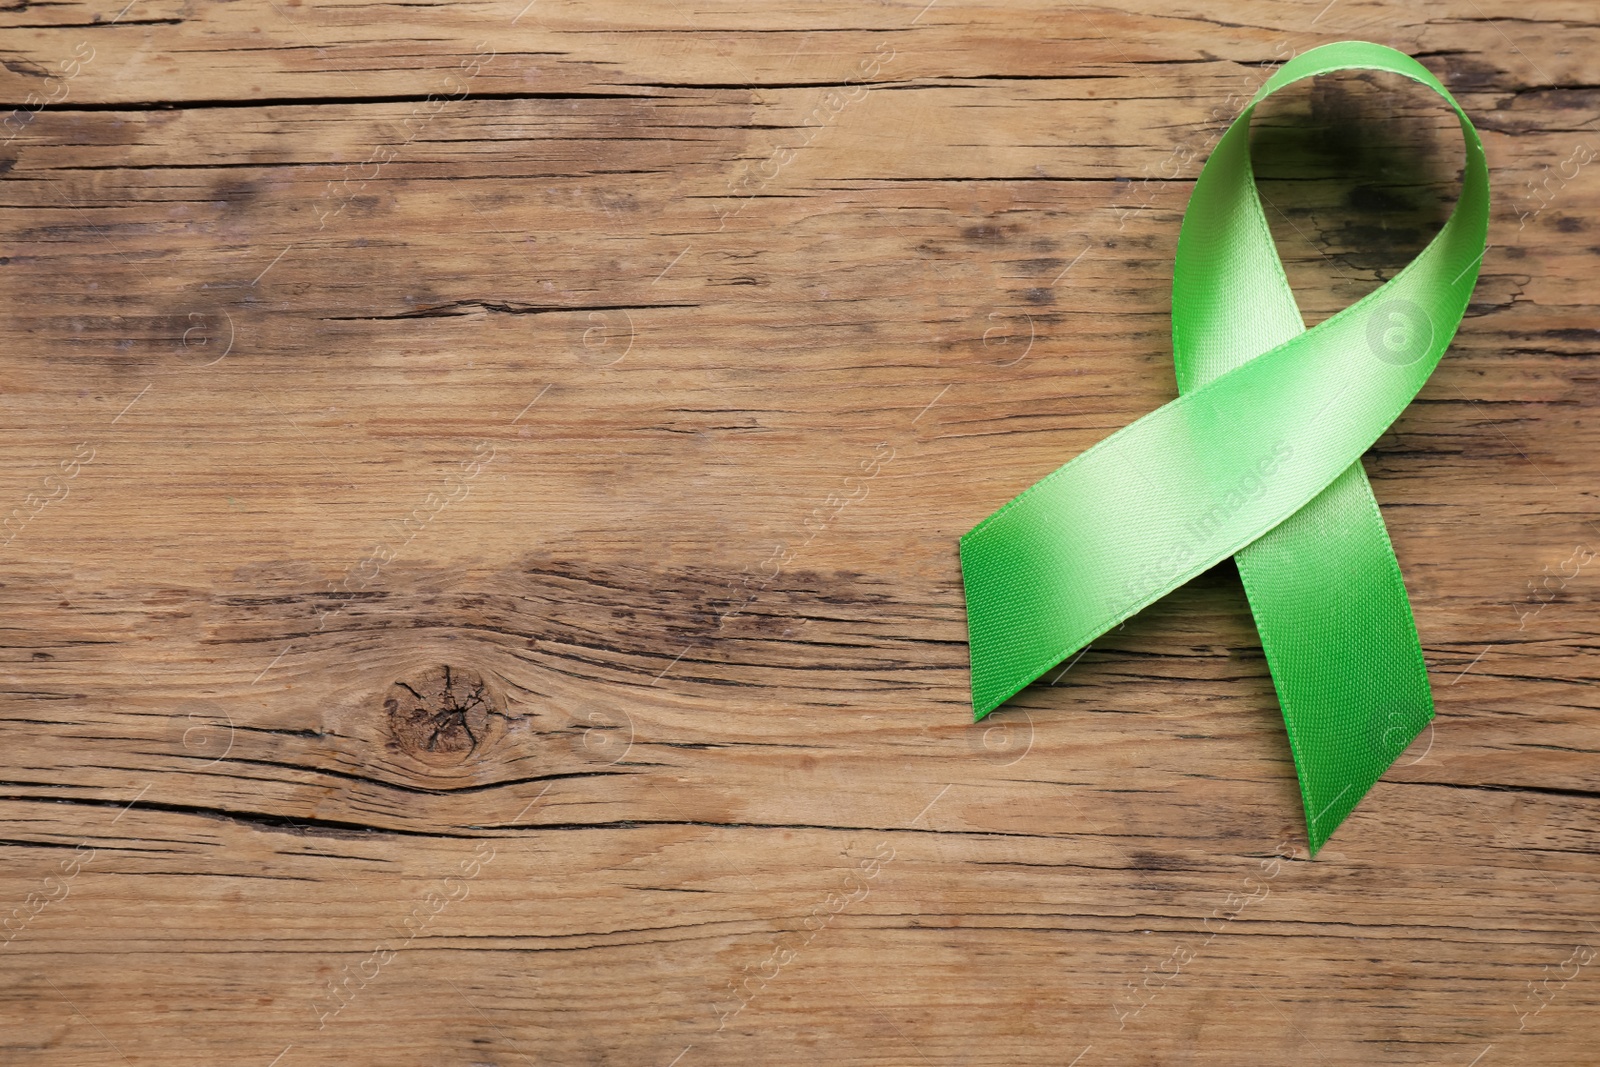 Photo of World Mental Health Day. Green ribbon on wooden background, top view with space for text